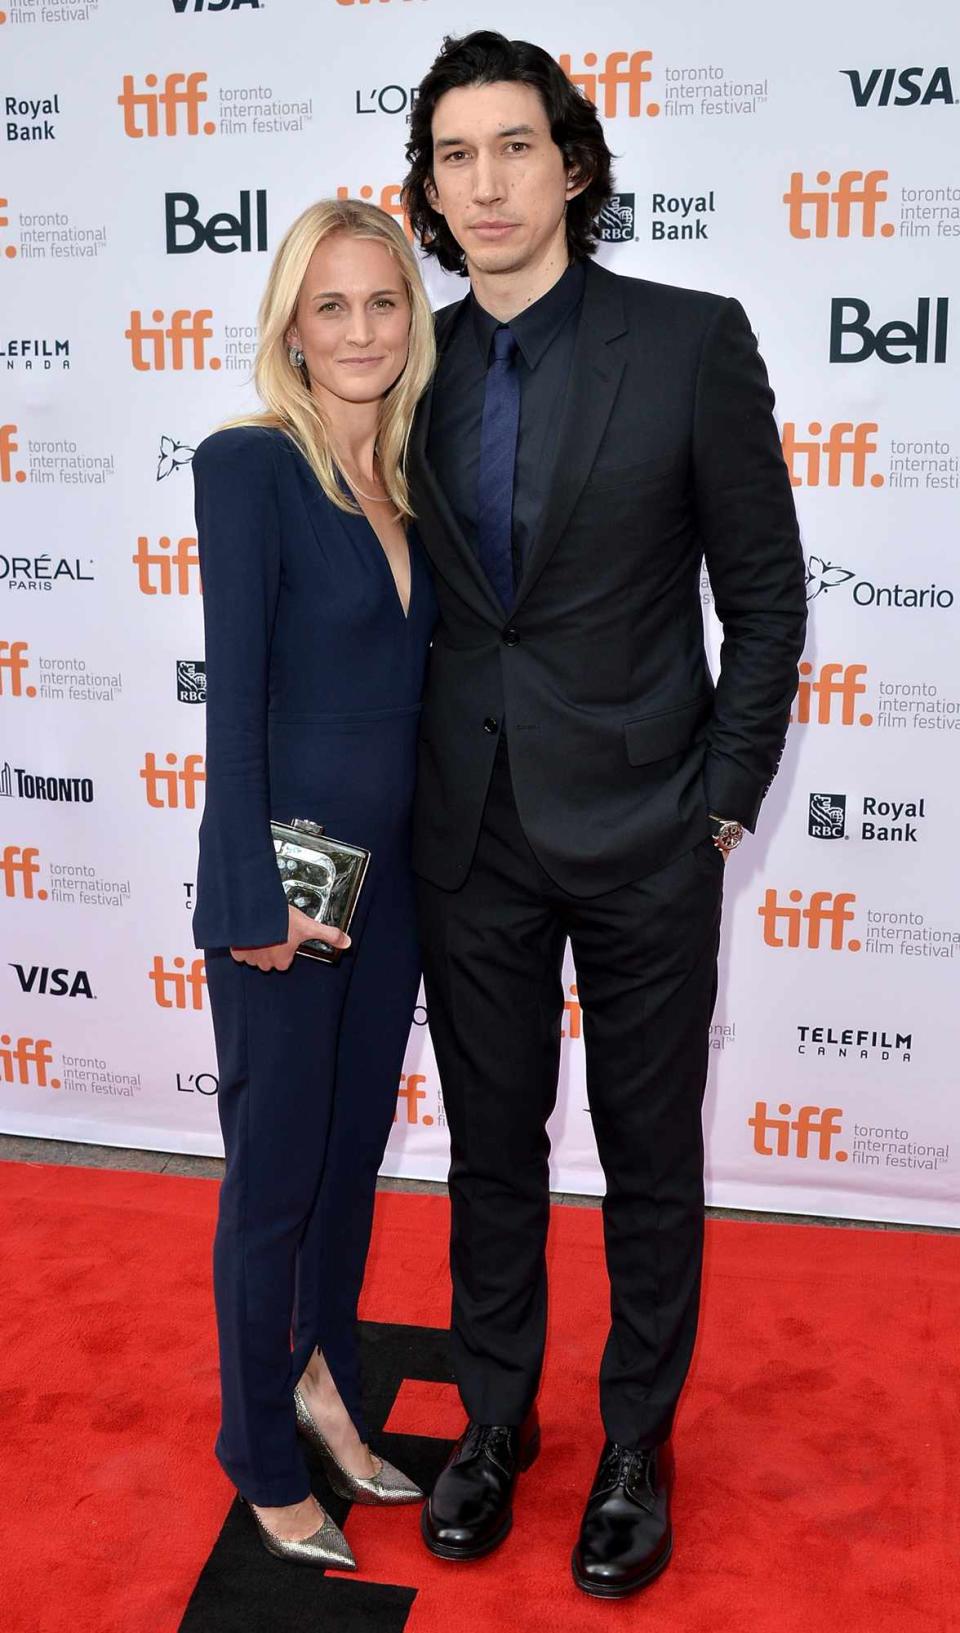 Joanne Tucker and Adam Driver attend the "While We're Young" premiere during the 2014 Toronto International Film Festival at Princess of Wales Theatre on September 6, 2014 in Toronto, Canada